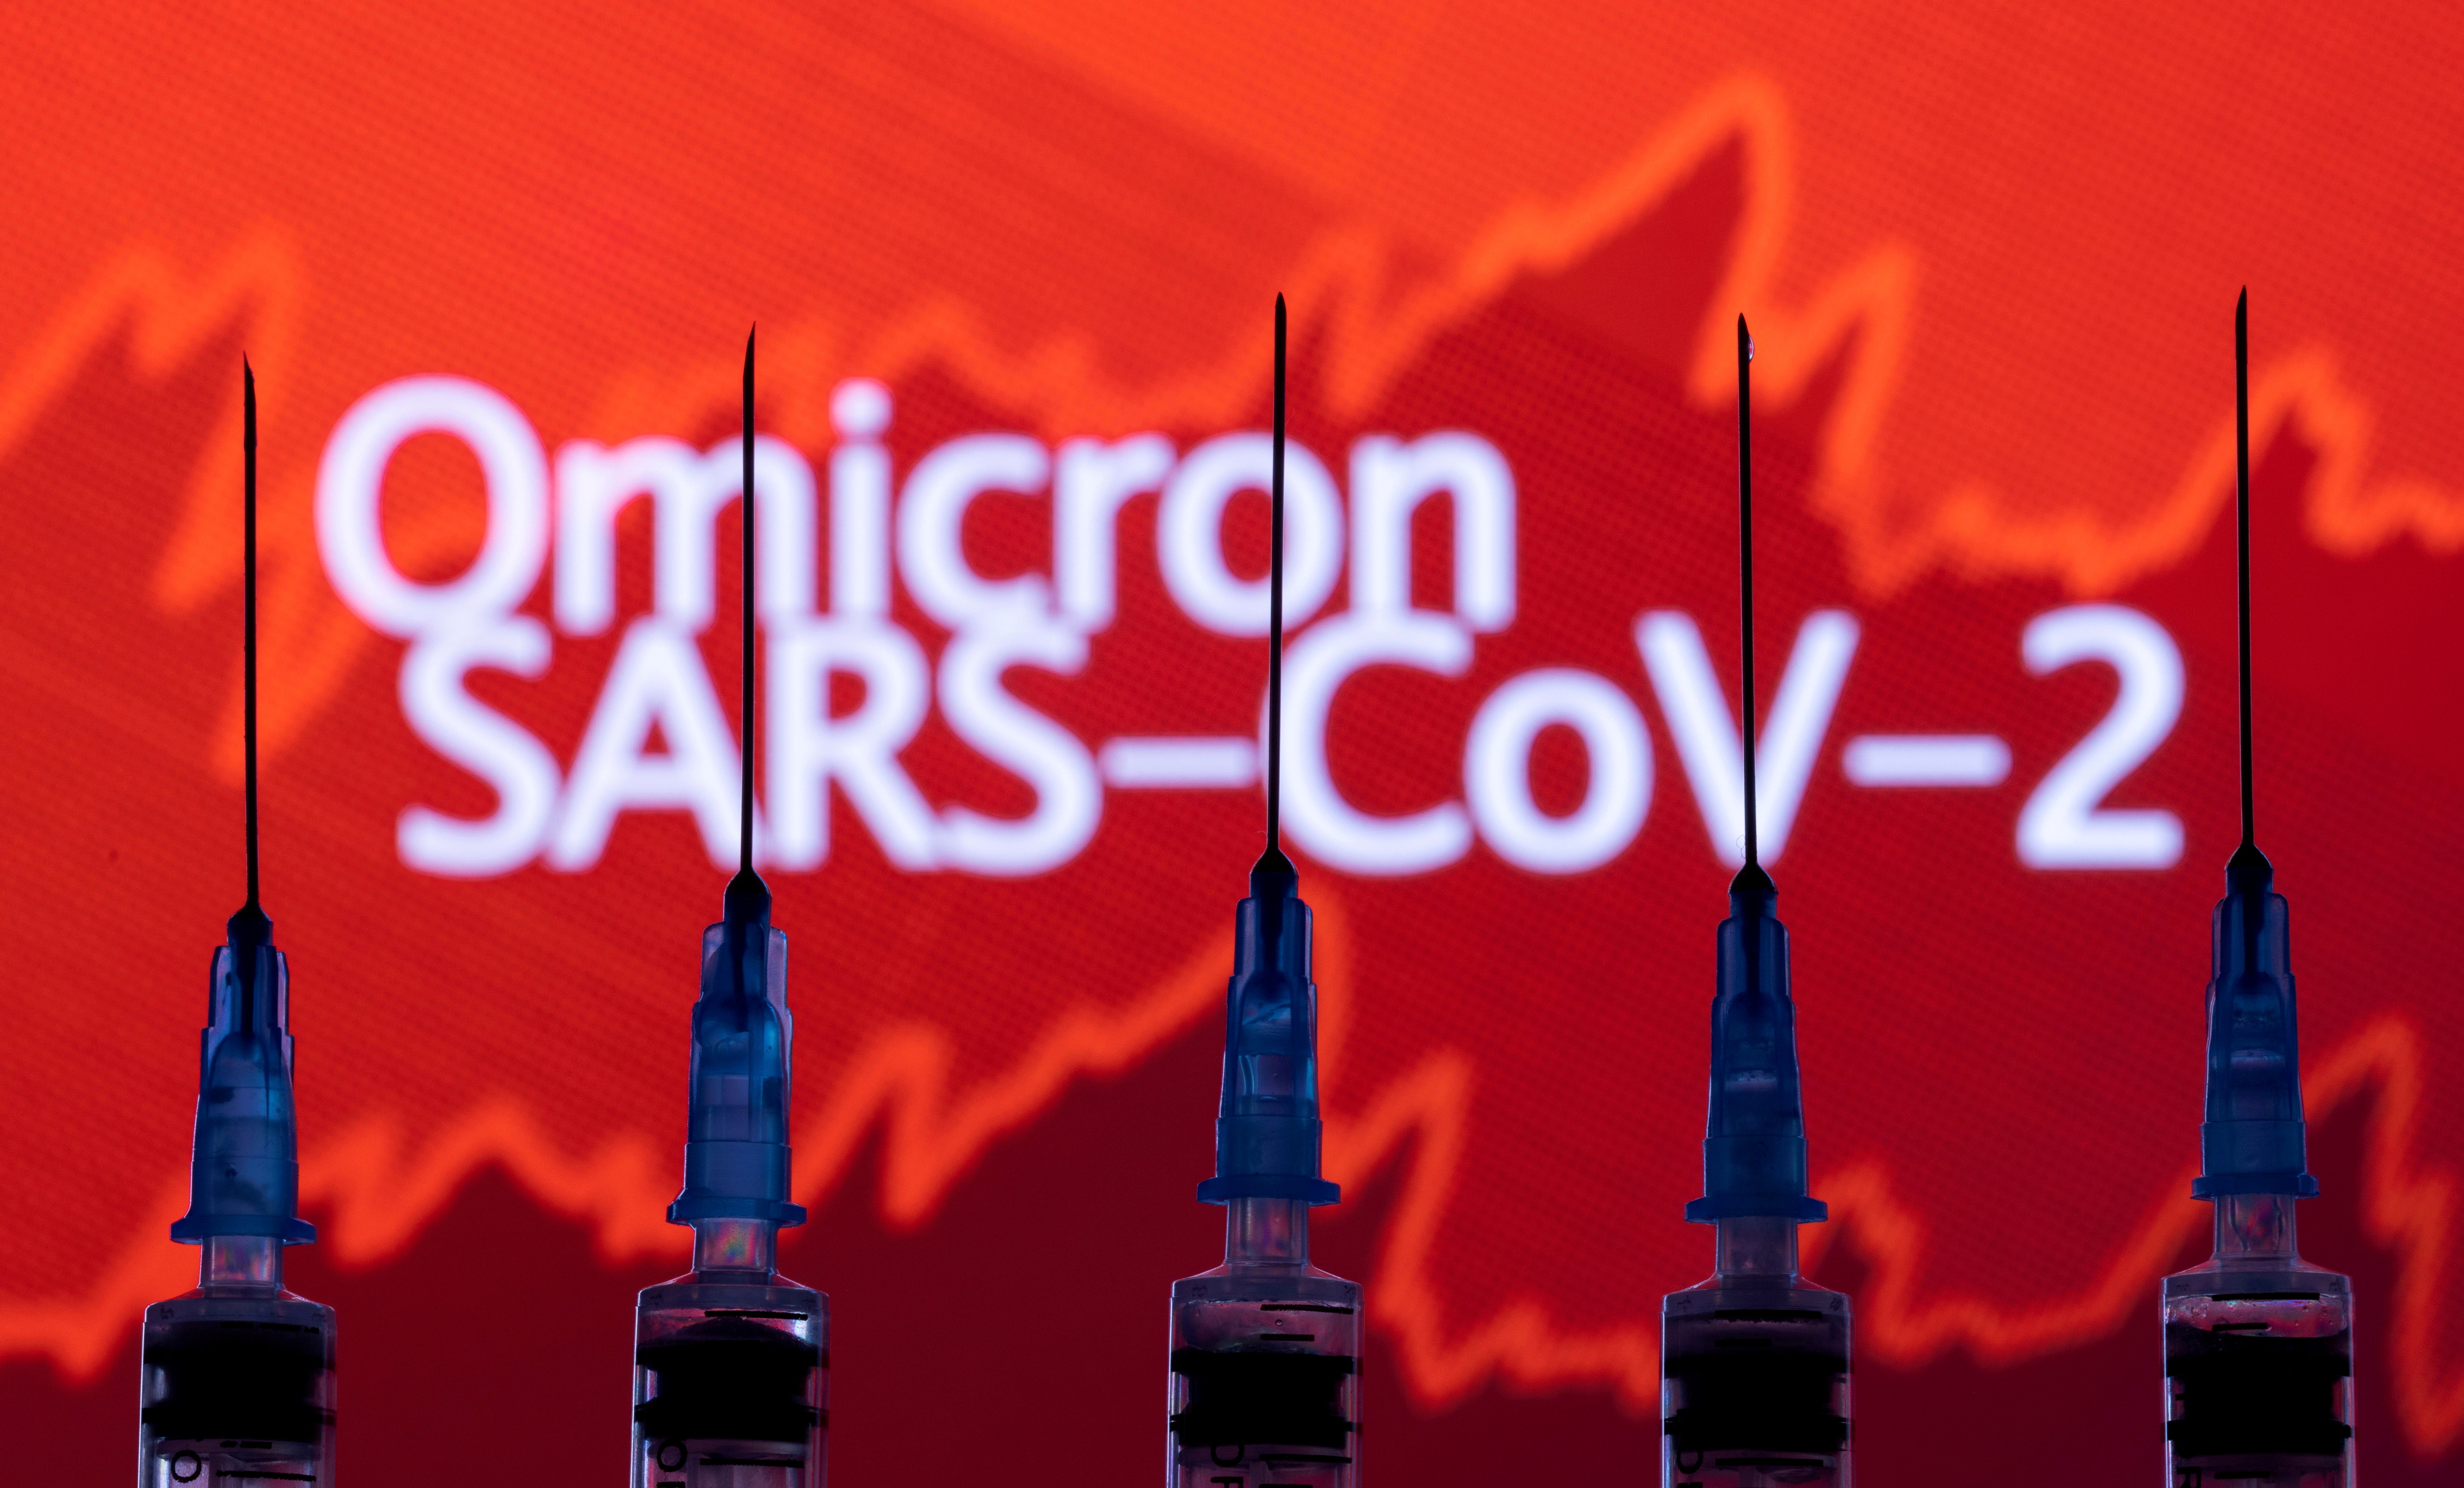 Syringes with needles are seen in front of a displayed stock graph and words "Omicron SARS-CoV-2" in this illustration taken, November 27, 2021